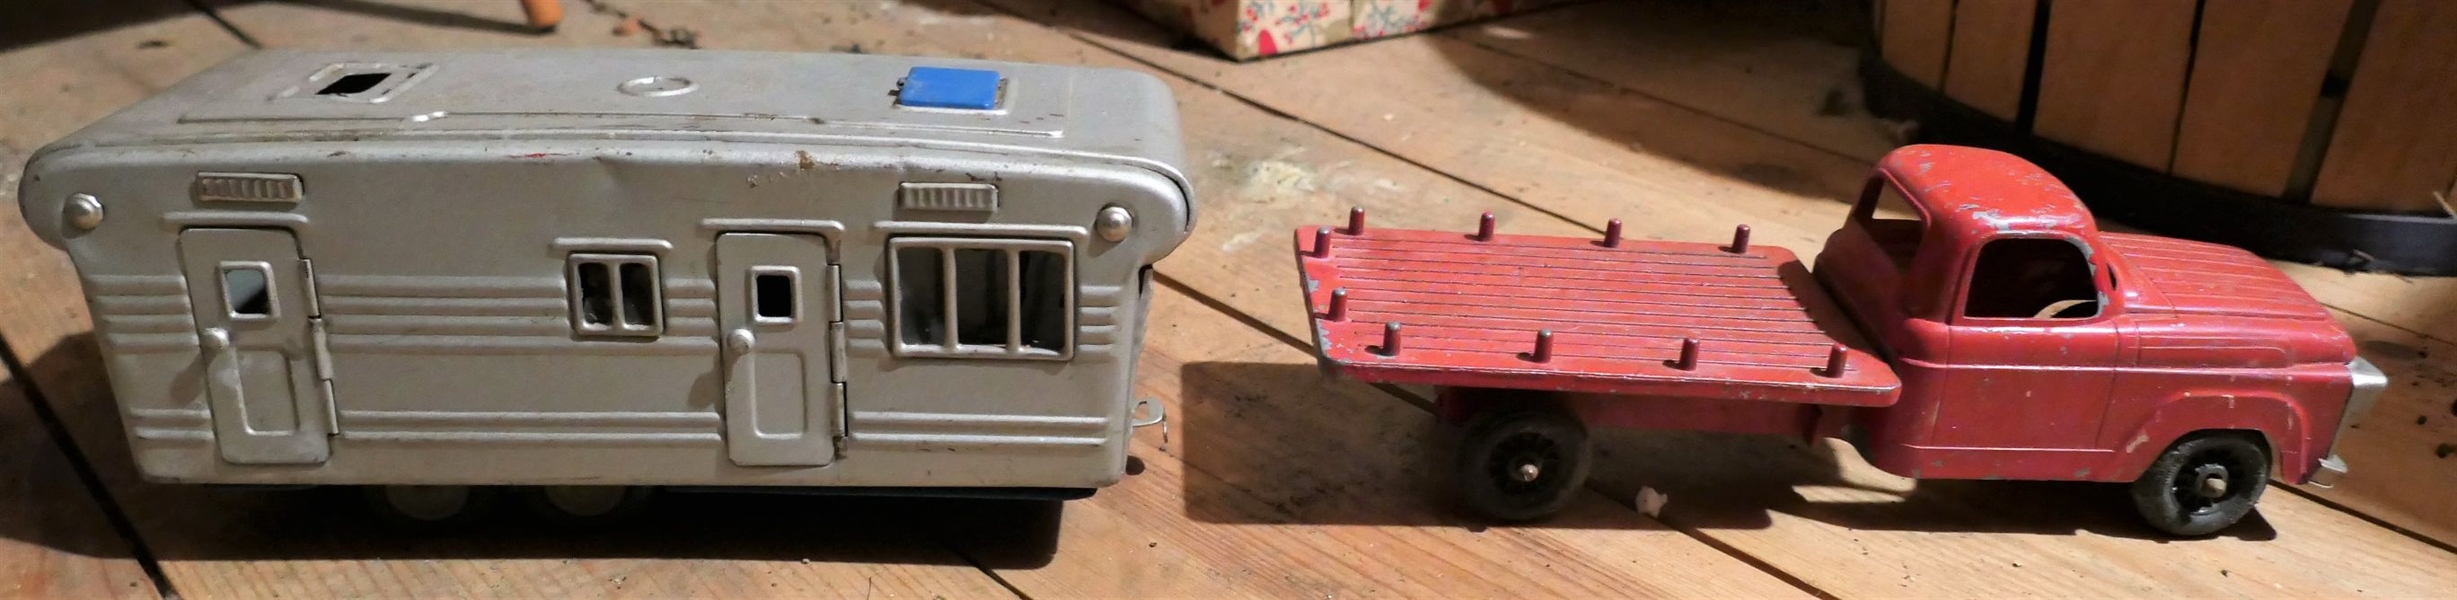 SSS Japan Metal Camper Toy and Red Metal Truck - Camper Measures 3 1/2" tall 8 1/2" by 3 3/4"